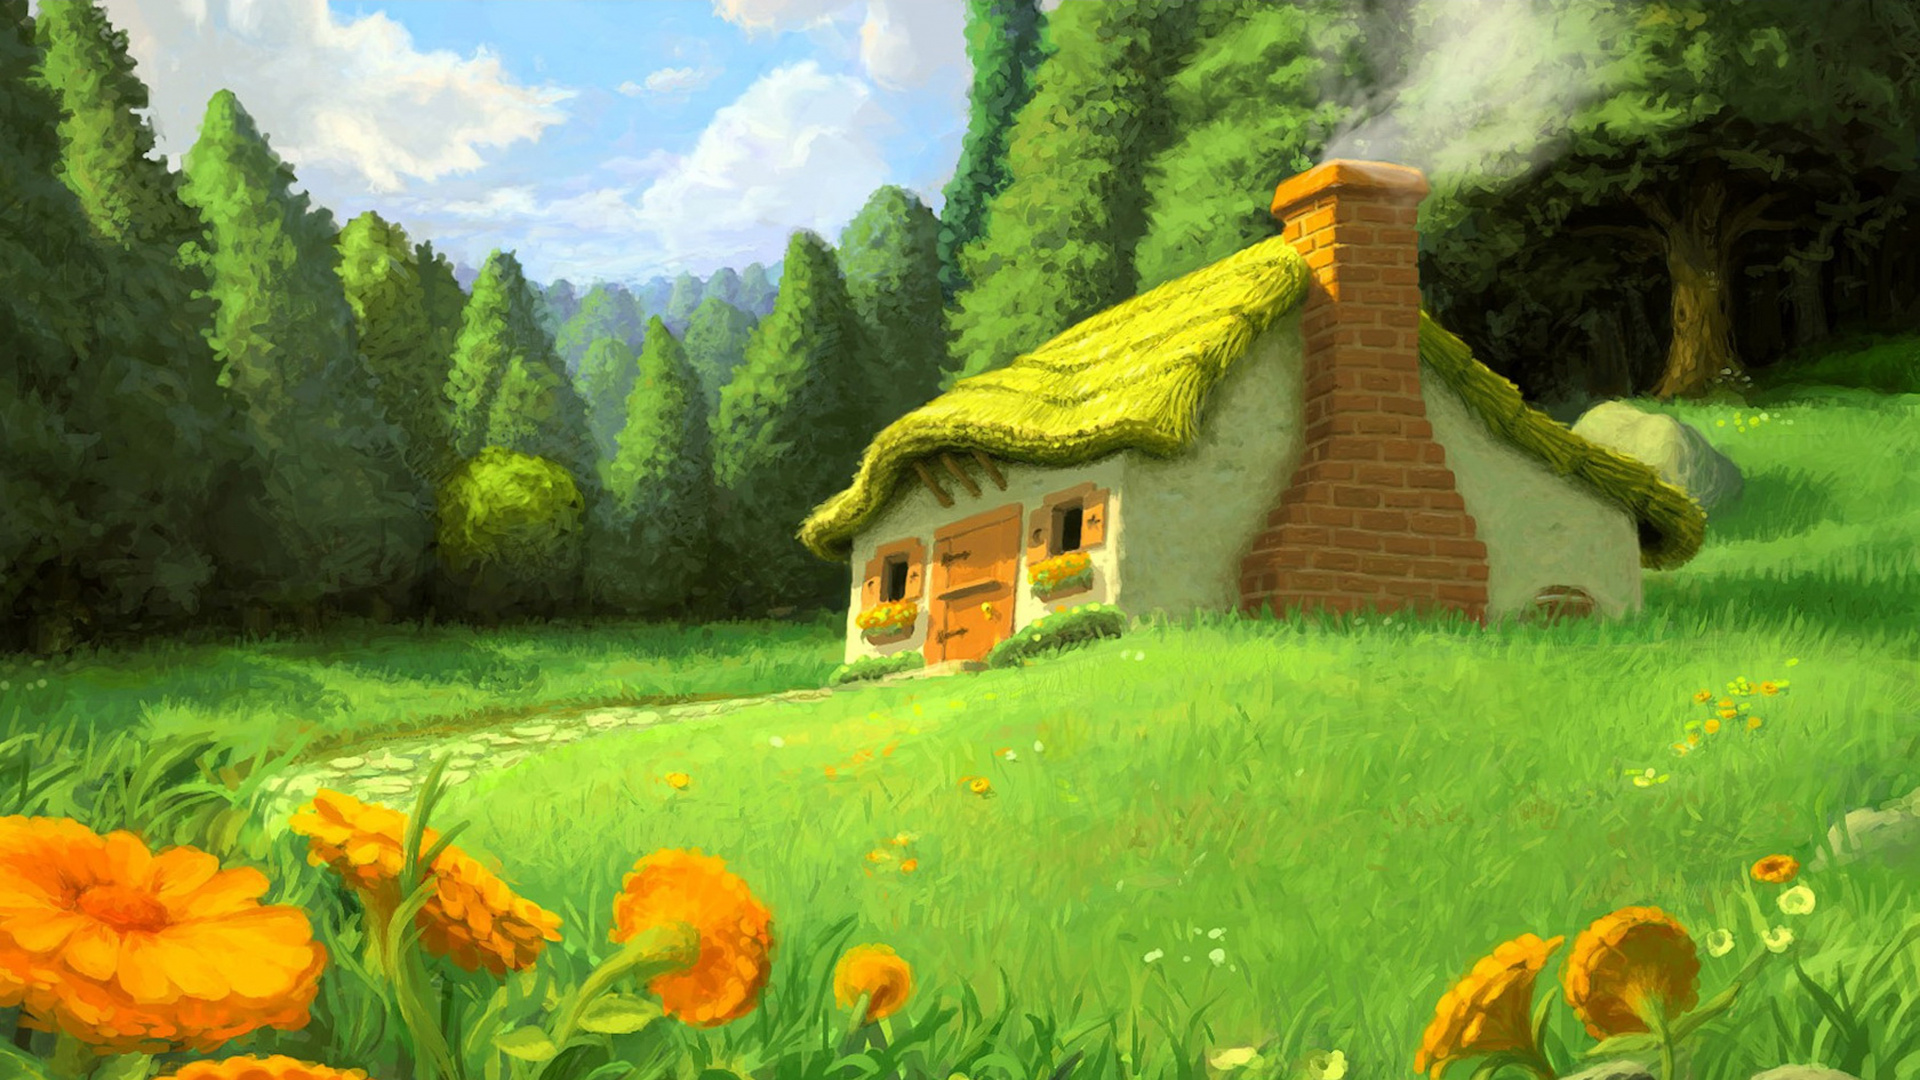 Brown Wooden House on Green Grass Field Near Green Trees During Daytime. Wallpaper in 1920x1080 Resolution